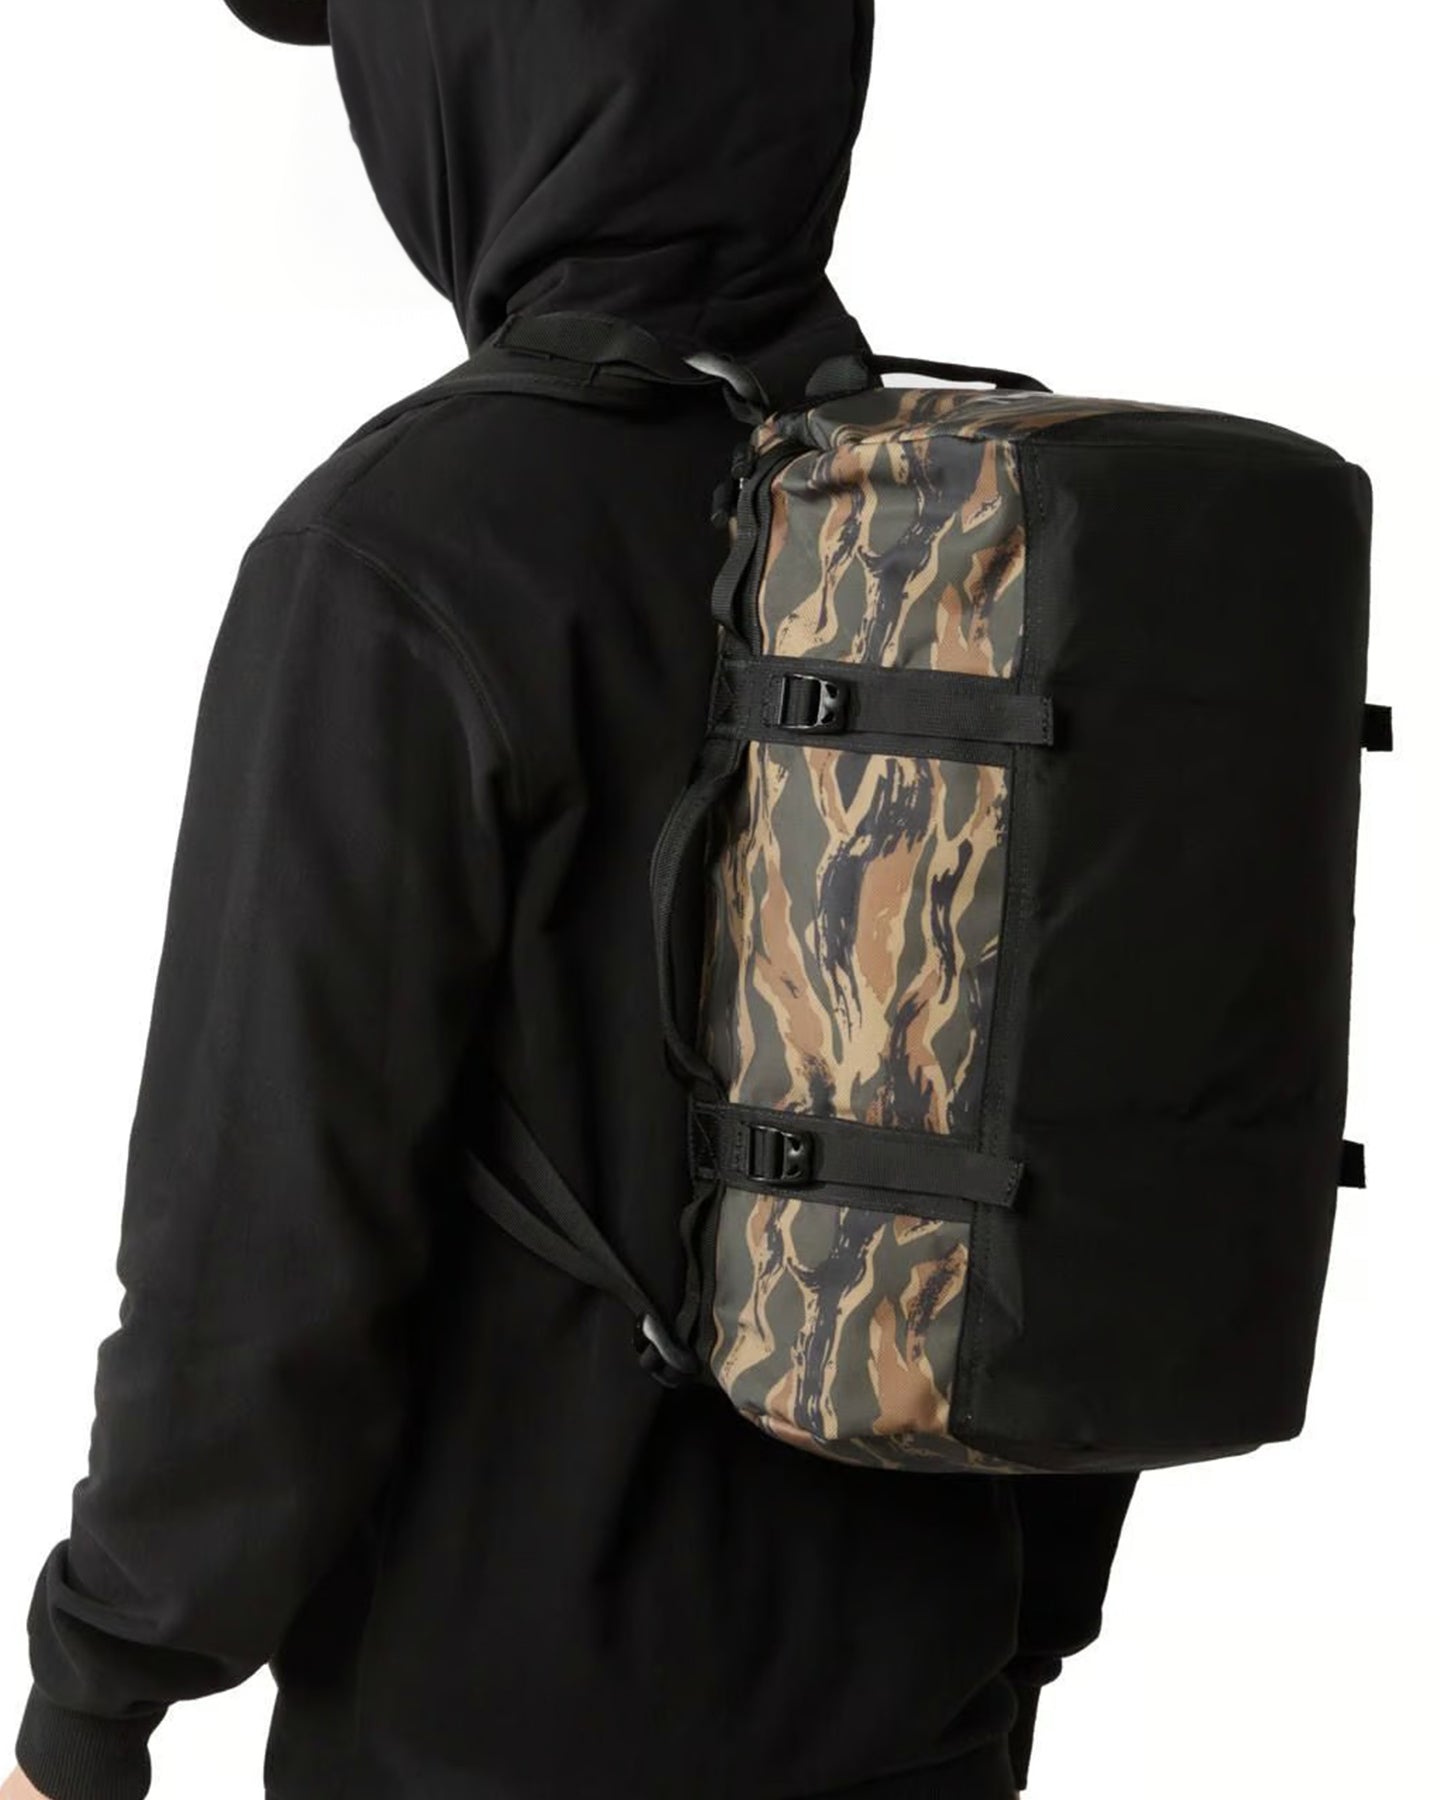 The North Face Base Camp Duffel - New Taupe Green Painted Camo Print / TNF Black - 2023 Luggage Bags - Trojan Wake Ski Snow